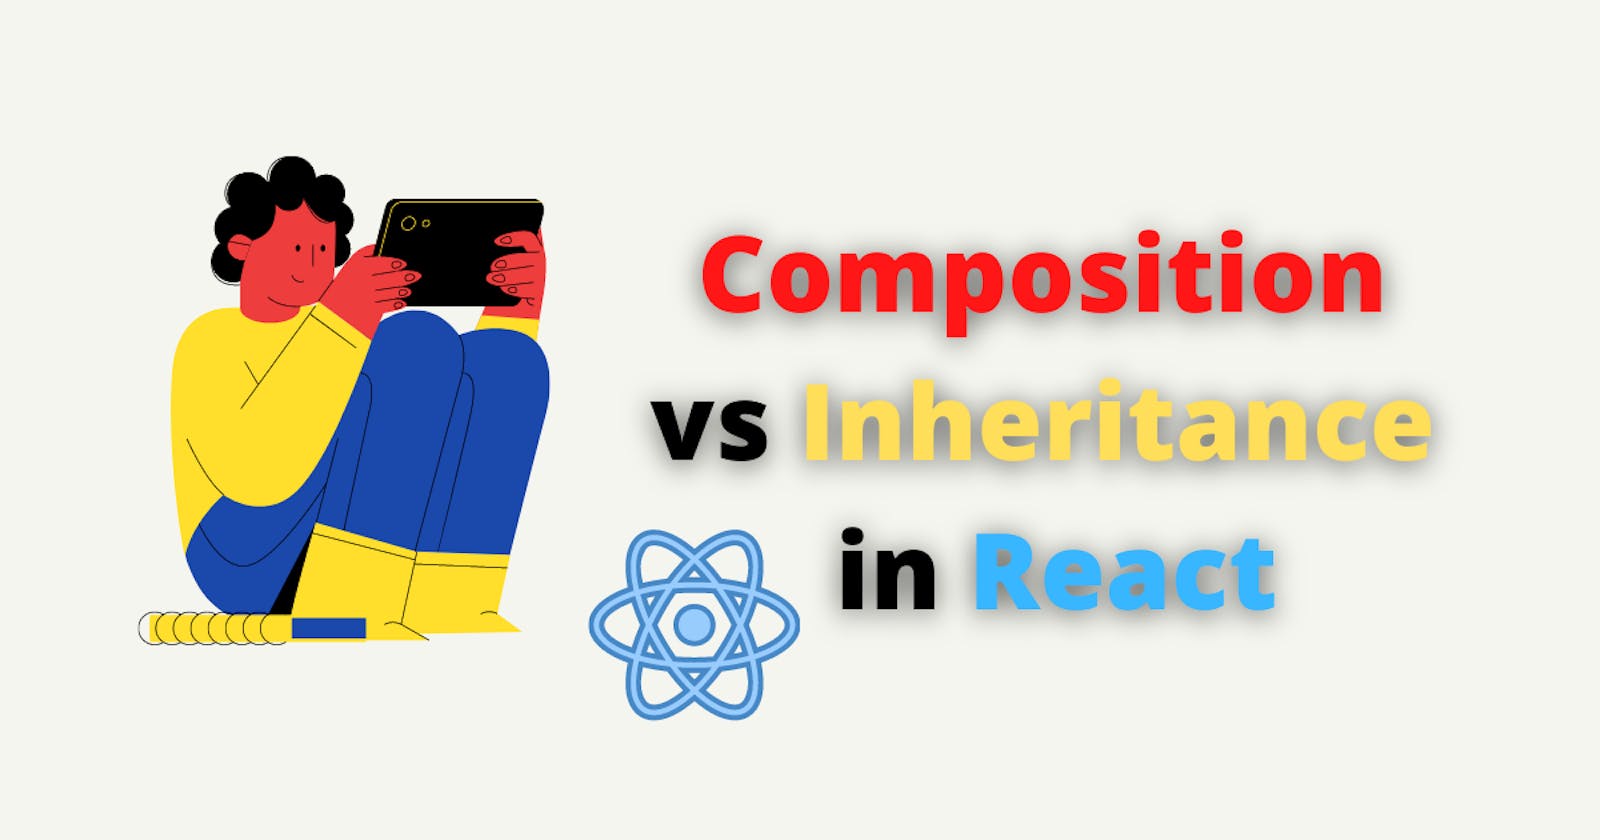 Composition vs Inheritance in React